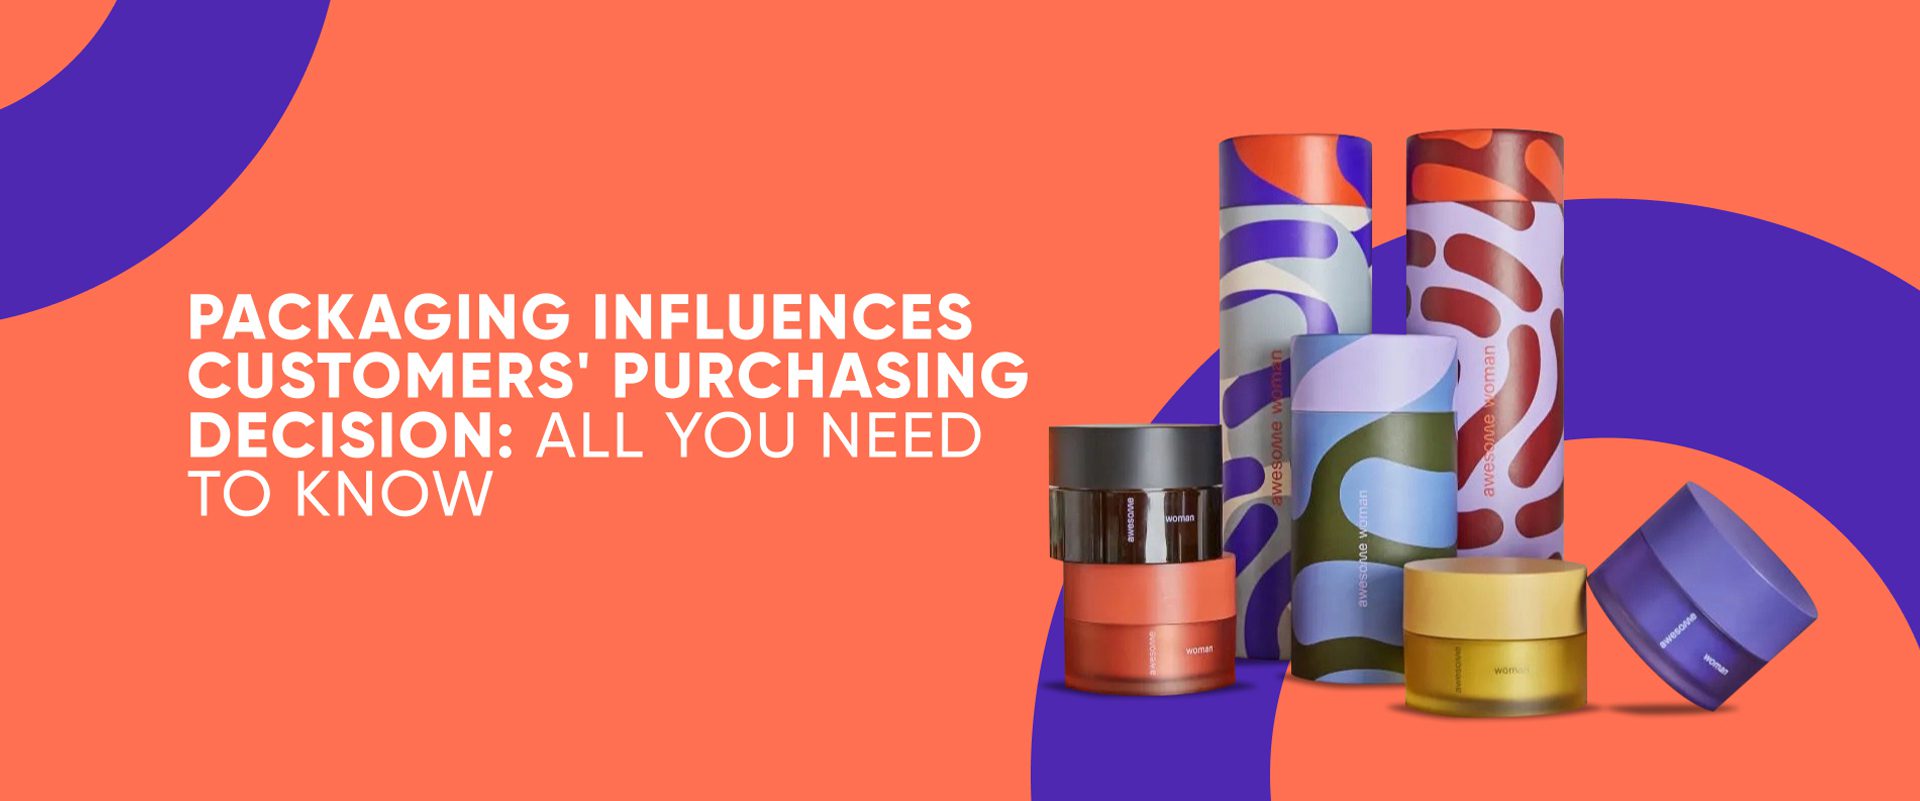 Packaging Influences Customers' Purchasing Decision